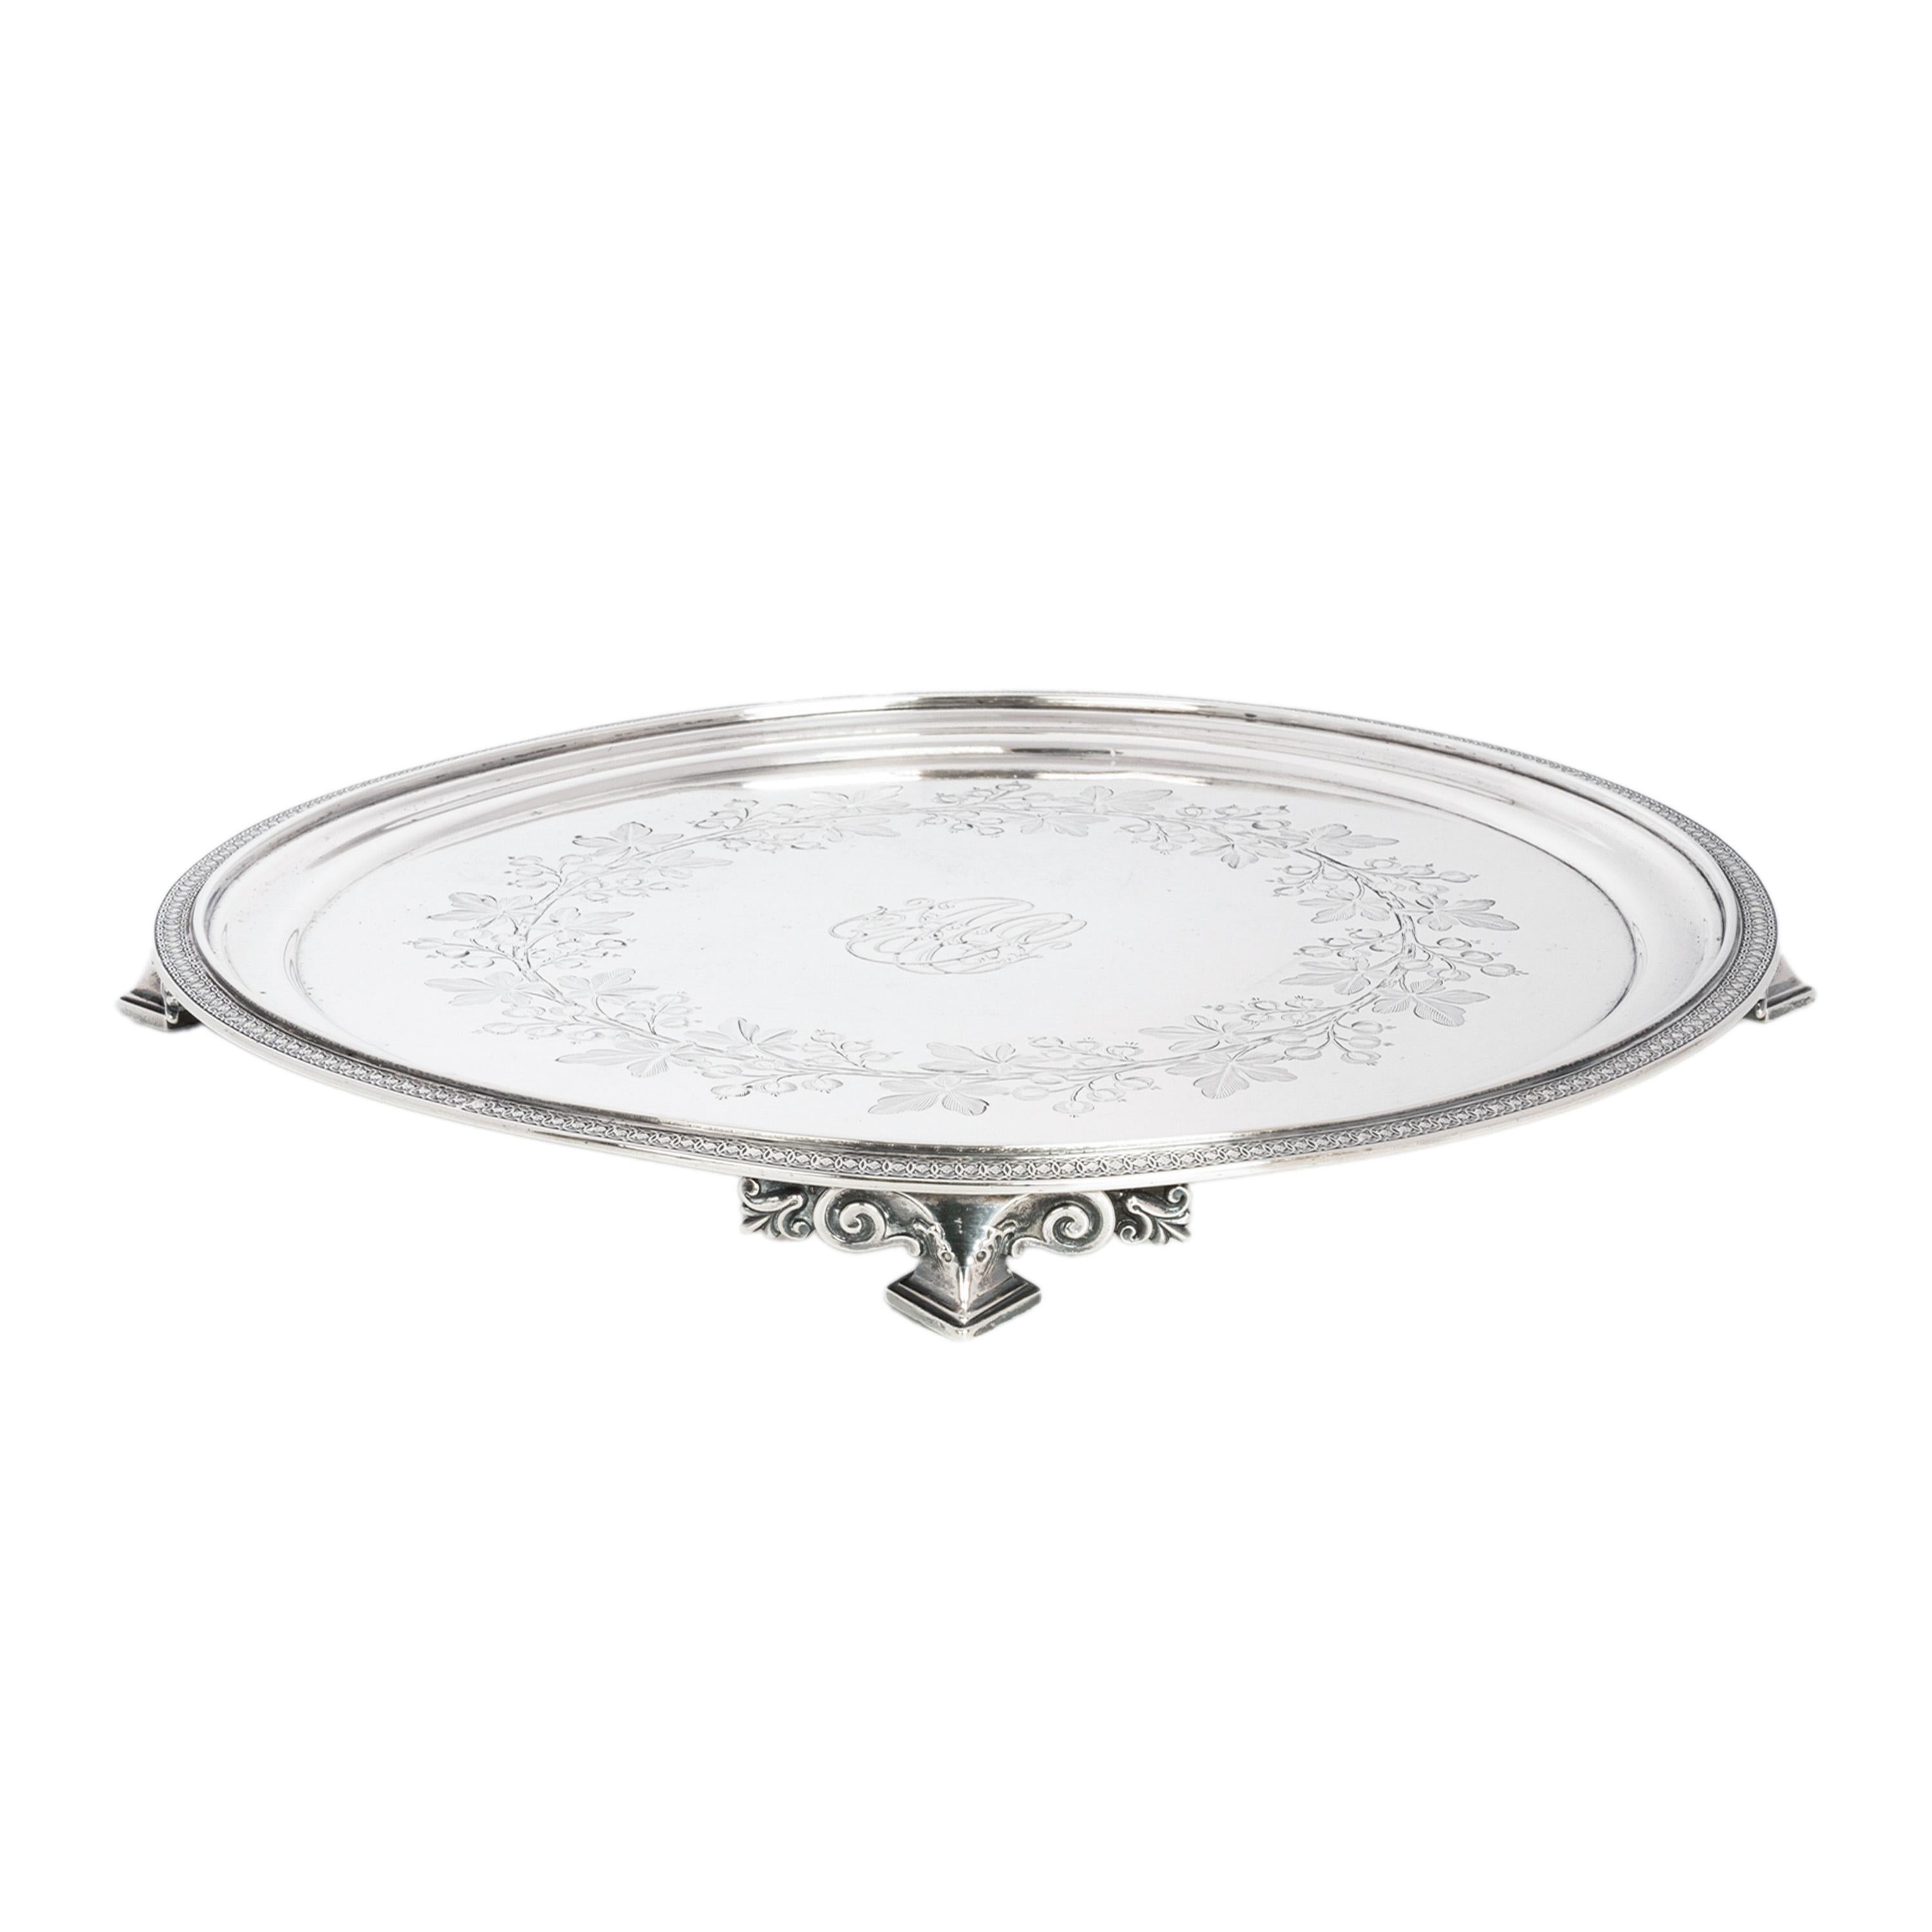 Mouvement esthétique Antique Sterling Silver Graved Tiffany & Co Footed Salver Tray New York 1870 en vente